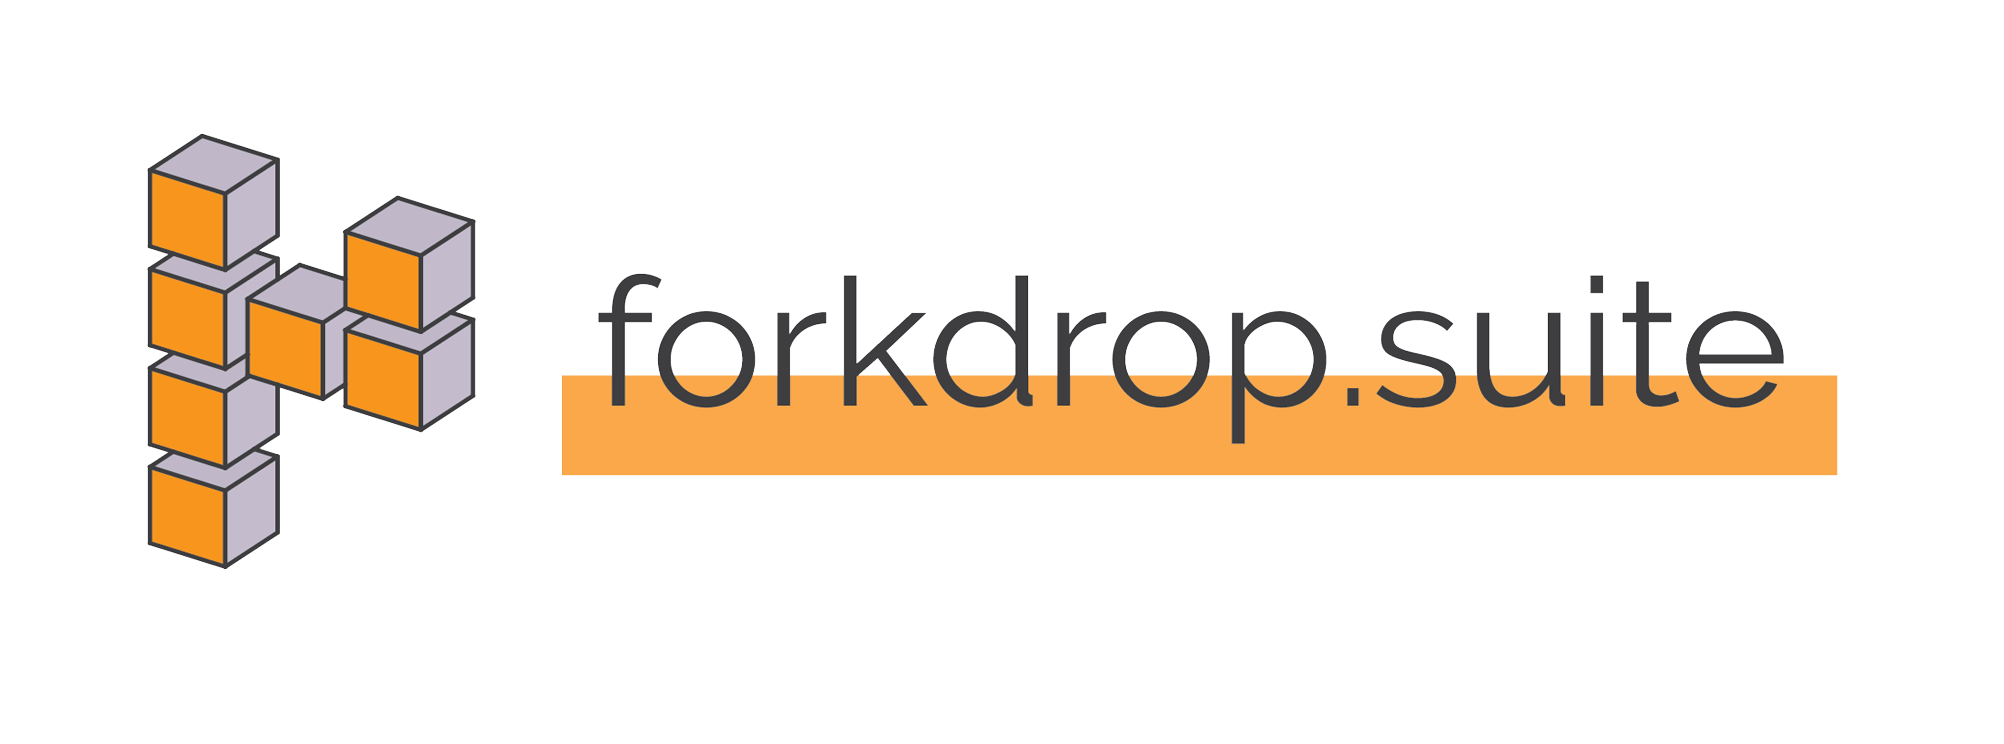 Forkdrop Suite Secure And Private Bitcoin Fork Claiming Via Tails - 